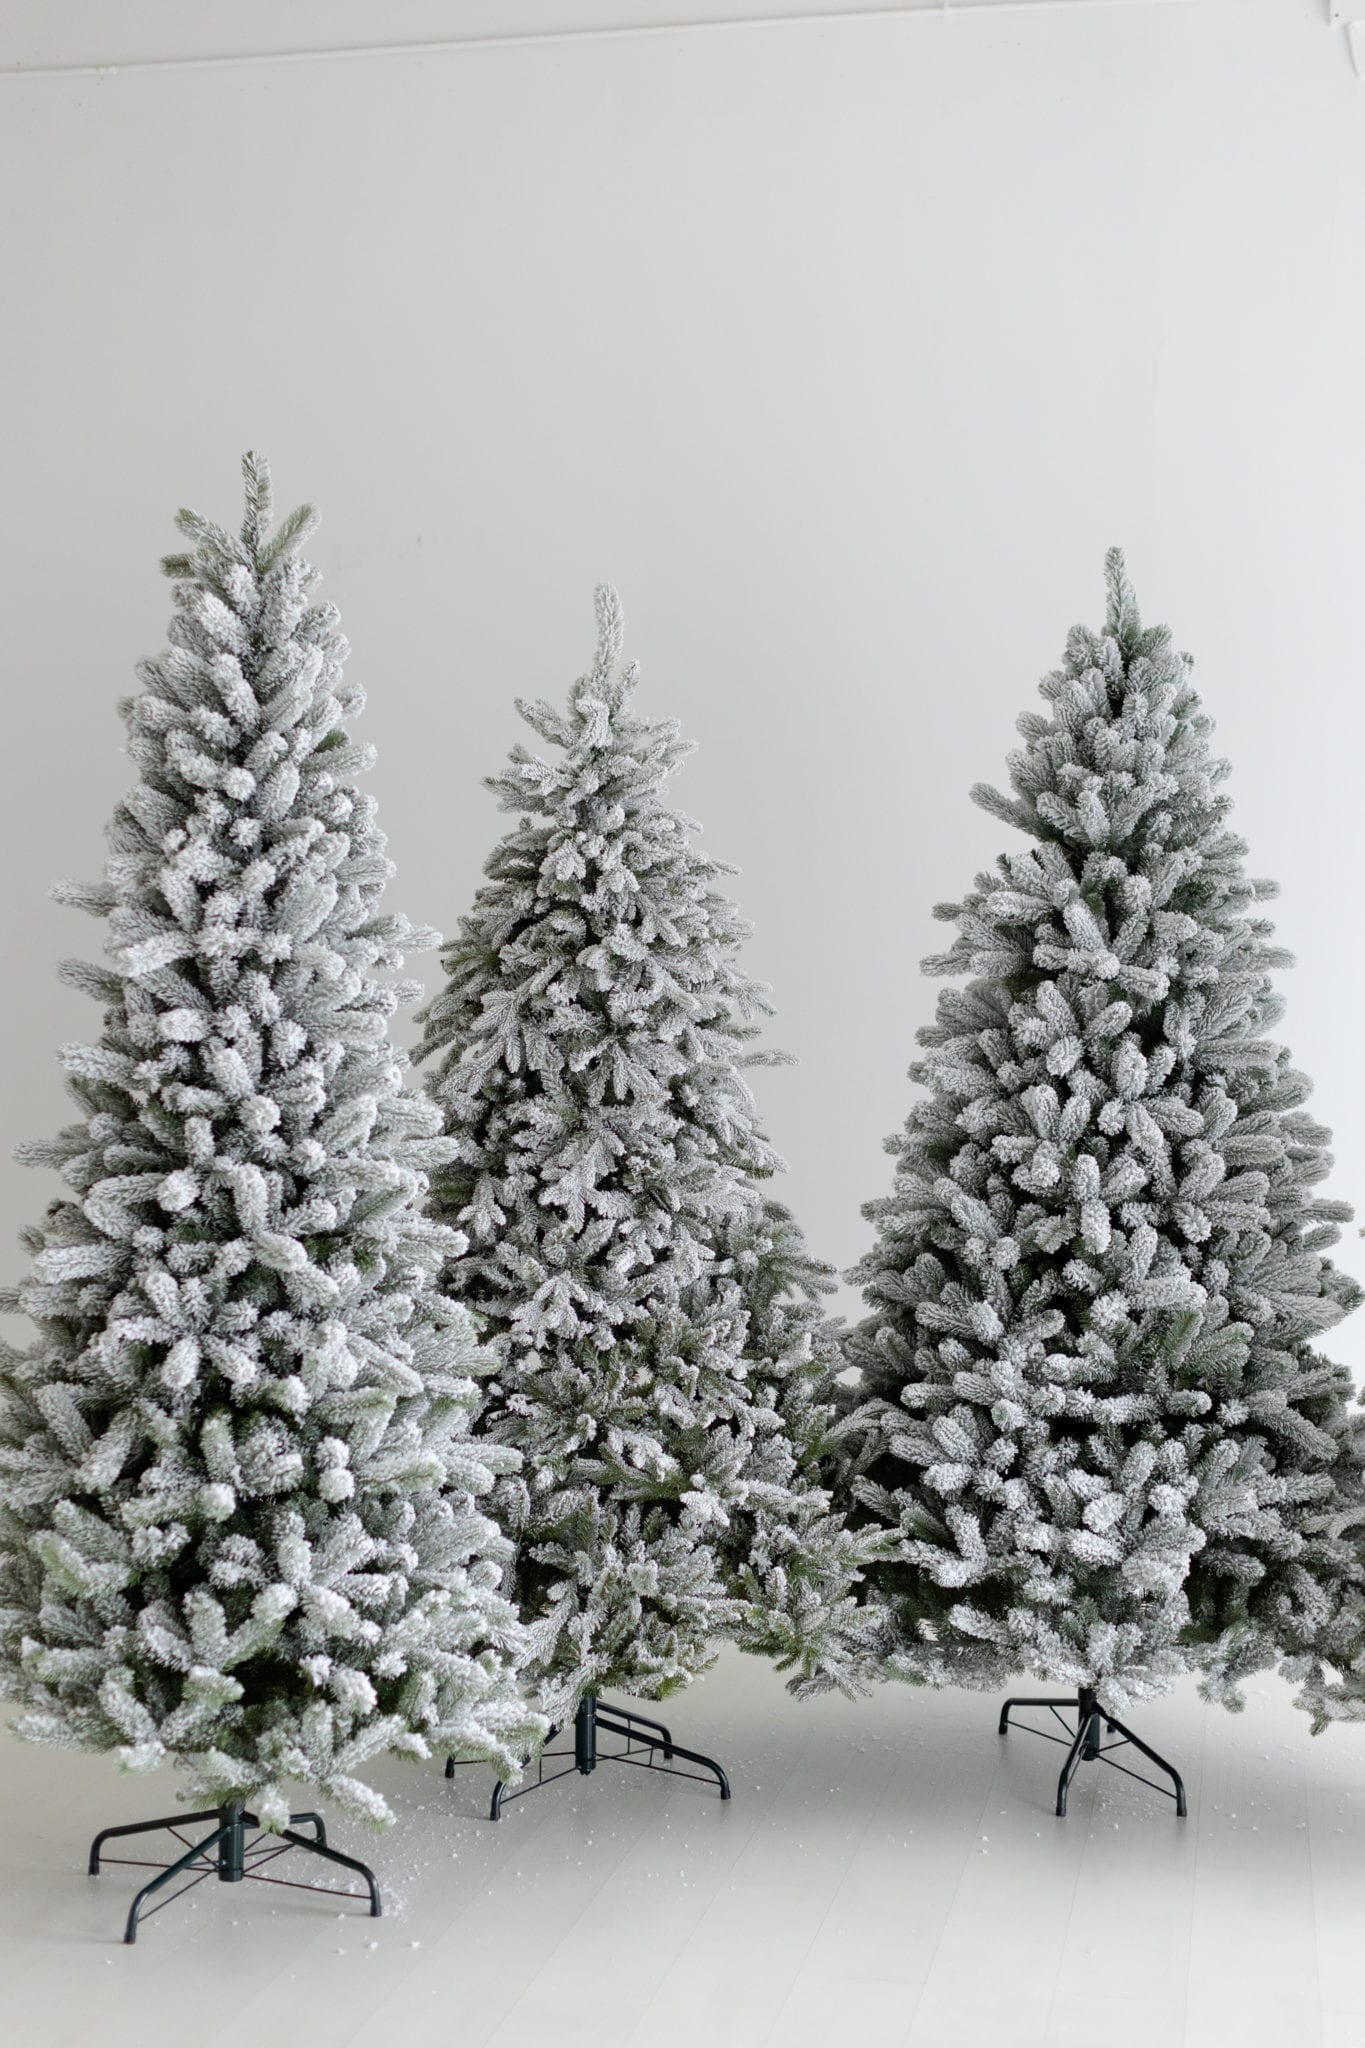 Pre Flocked Christmas trees for Christmas 2020. The best pre-lit, pre-flocked Christmas trees available online. 